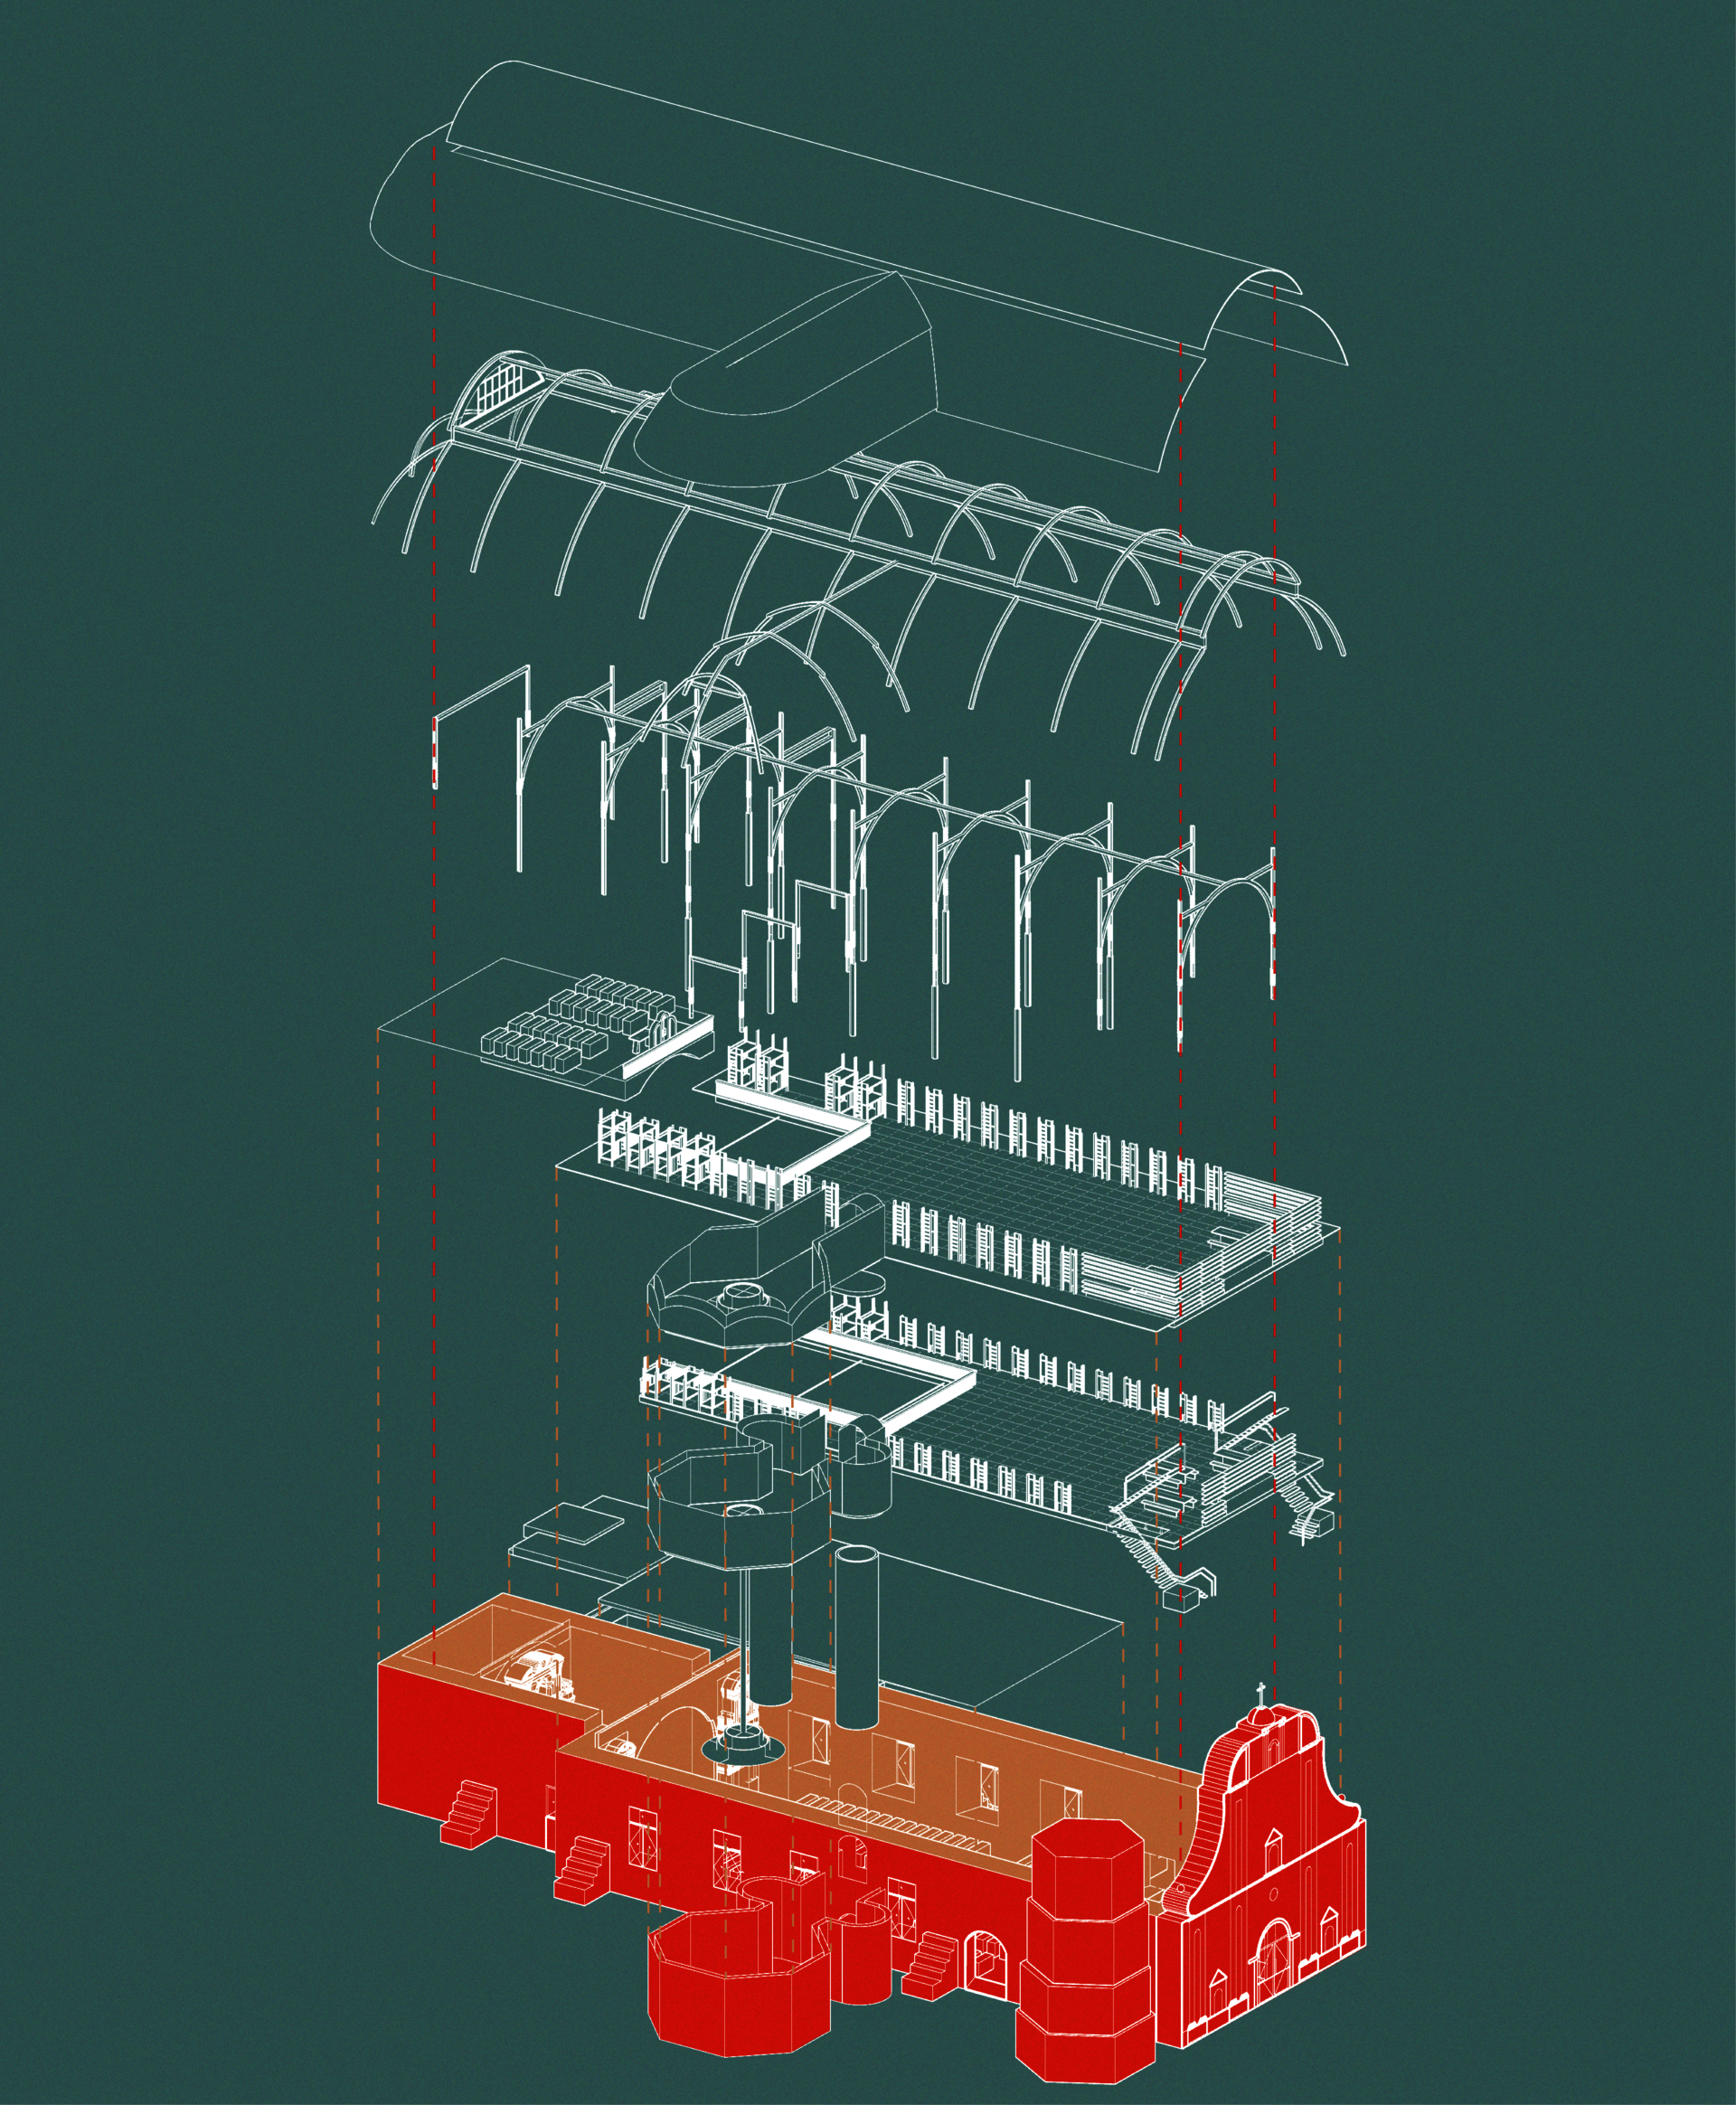 Exploded axonometric view of existing building and intervention components